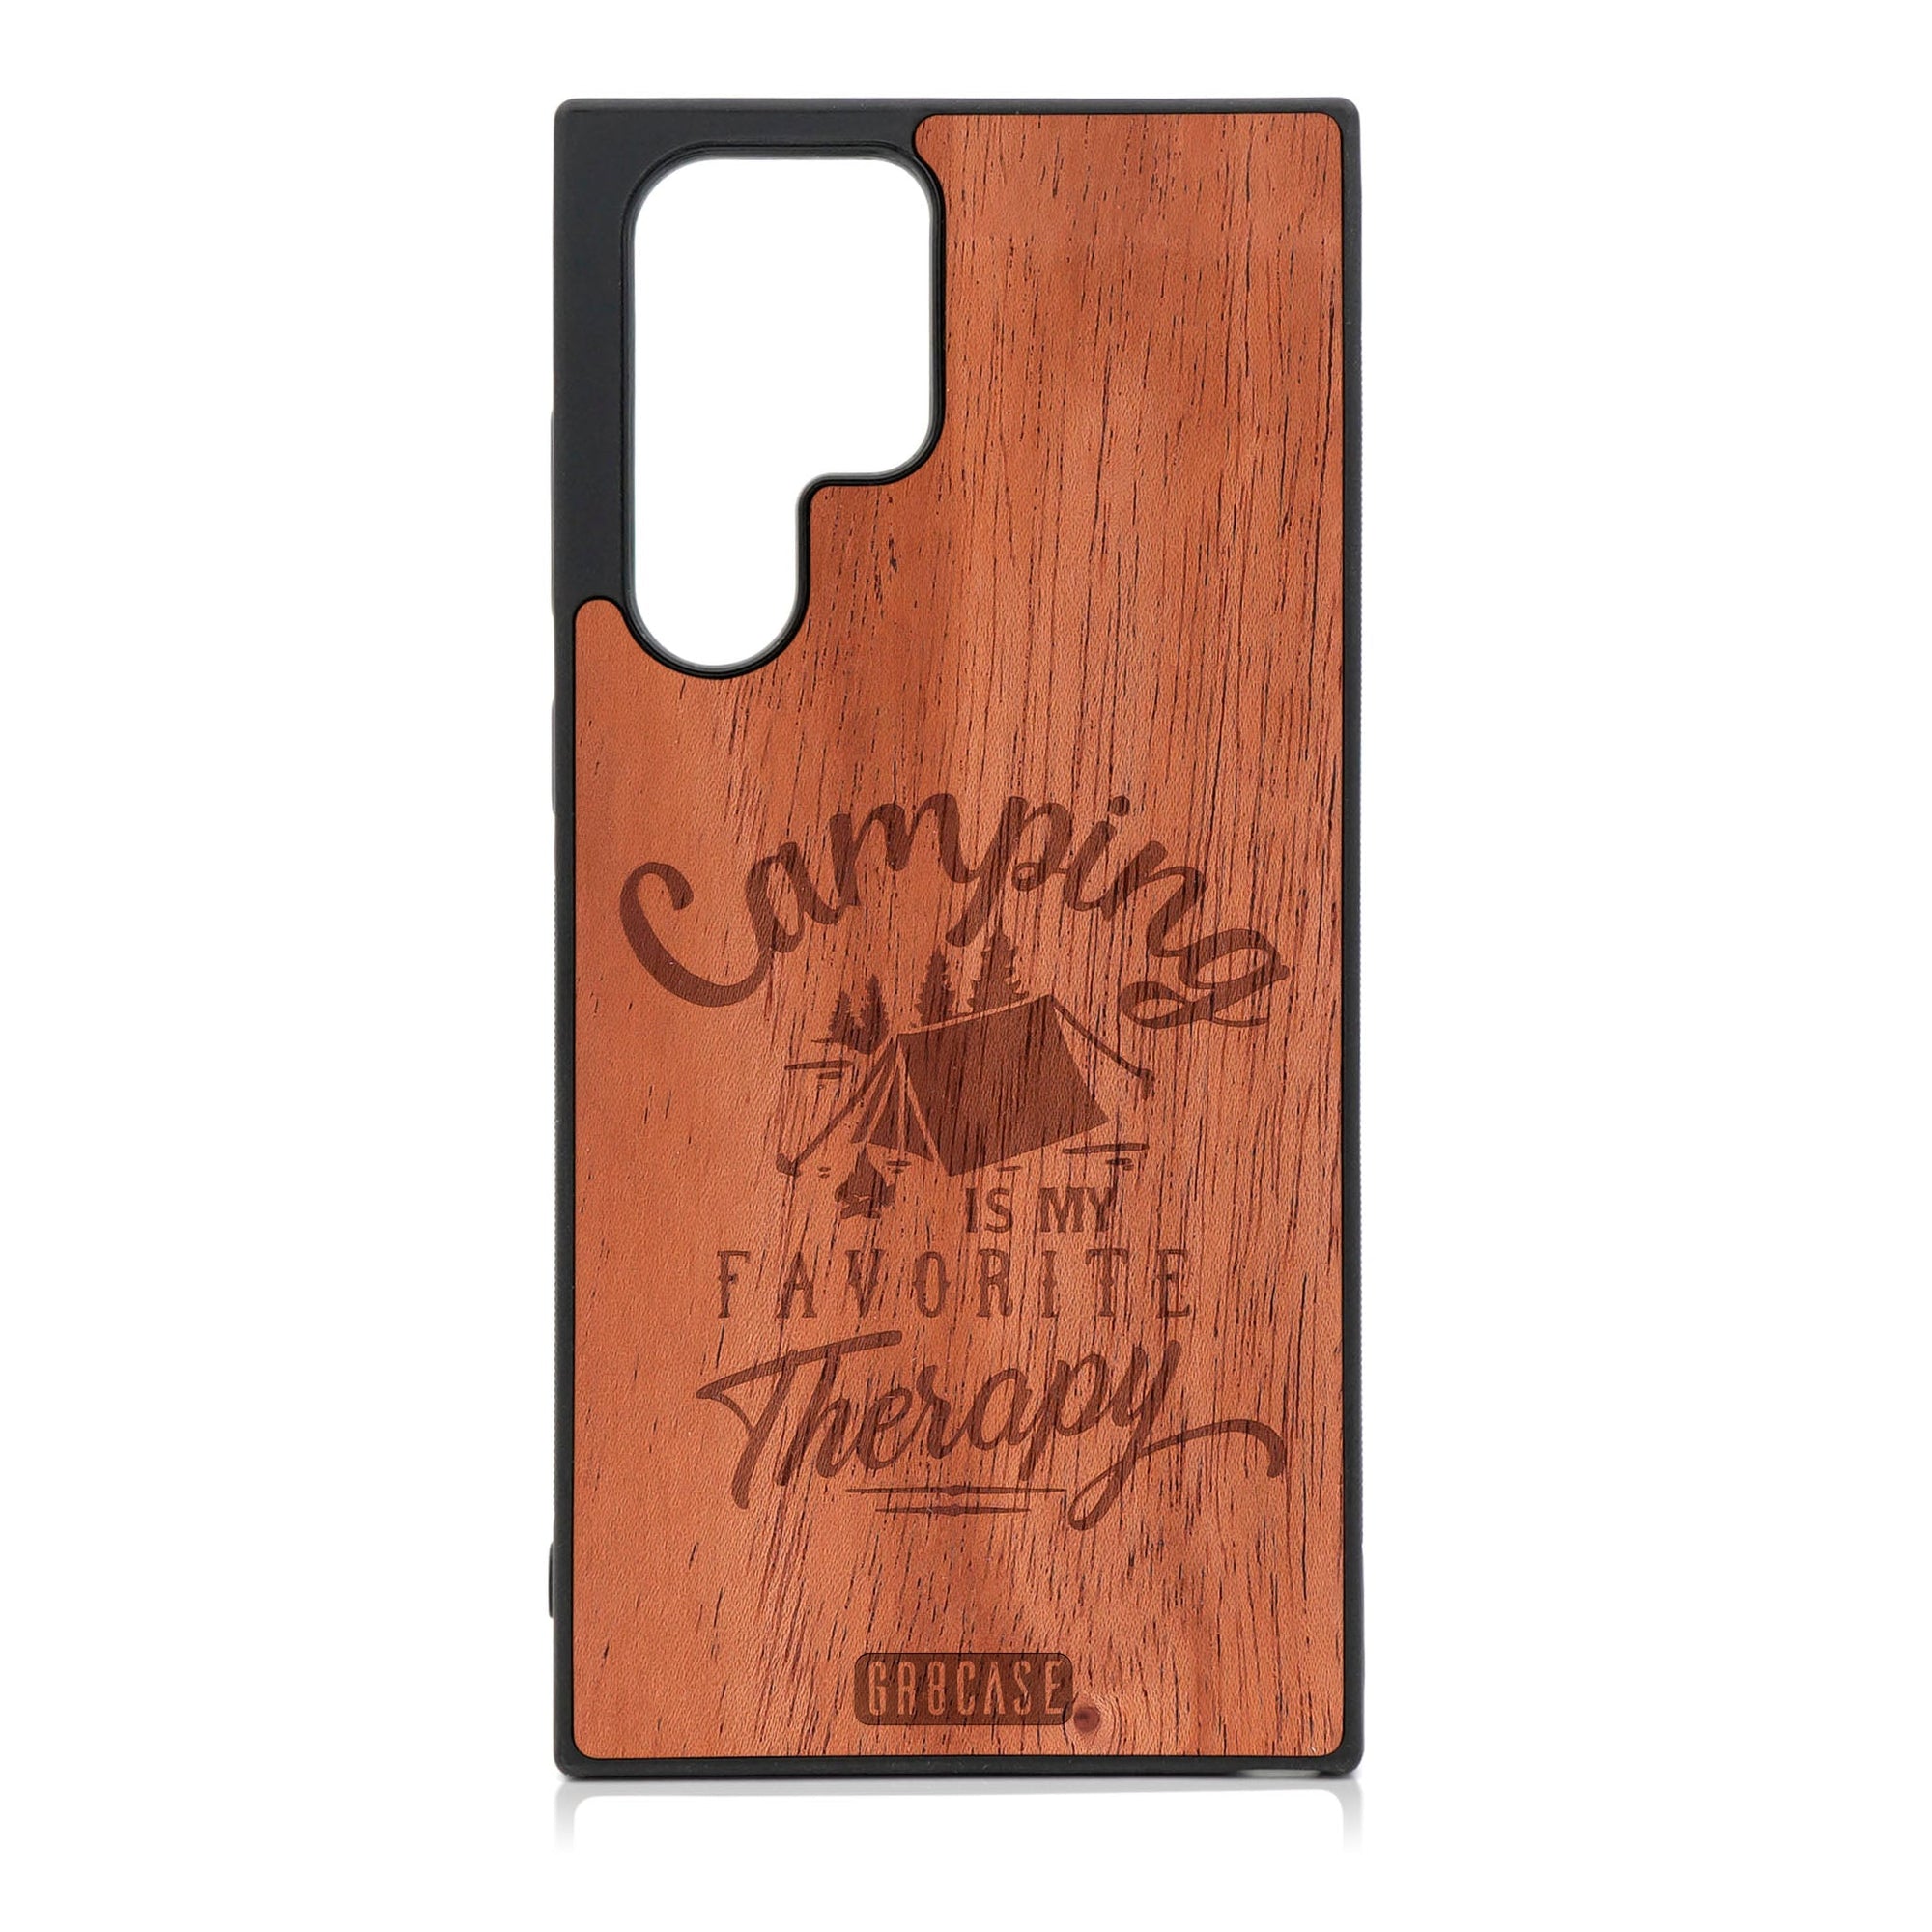 UNIVERSITY OF LOUISVILLE WOODEN LOGO Samsung Galaxy S23 Ultra Case Cover